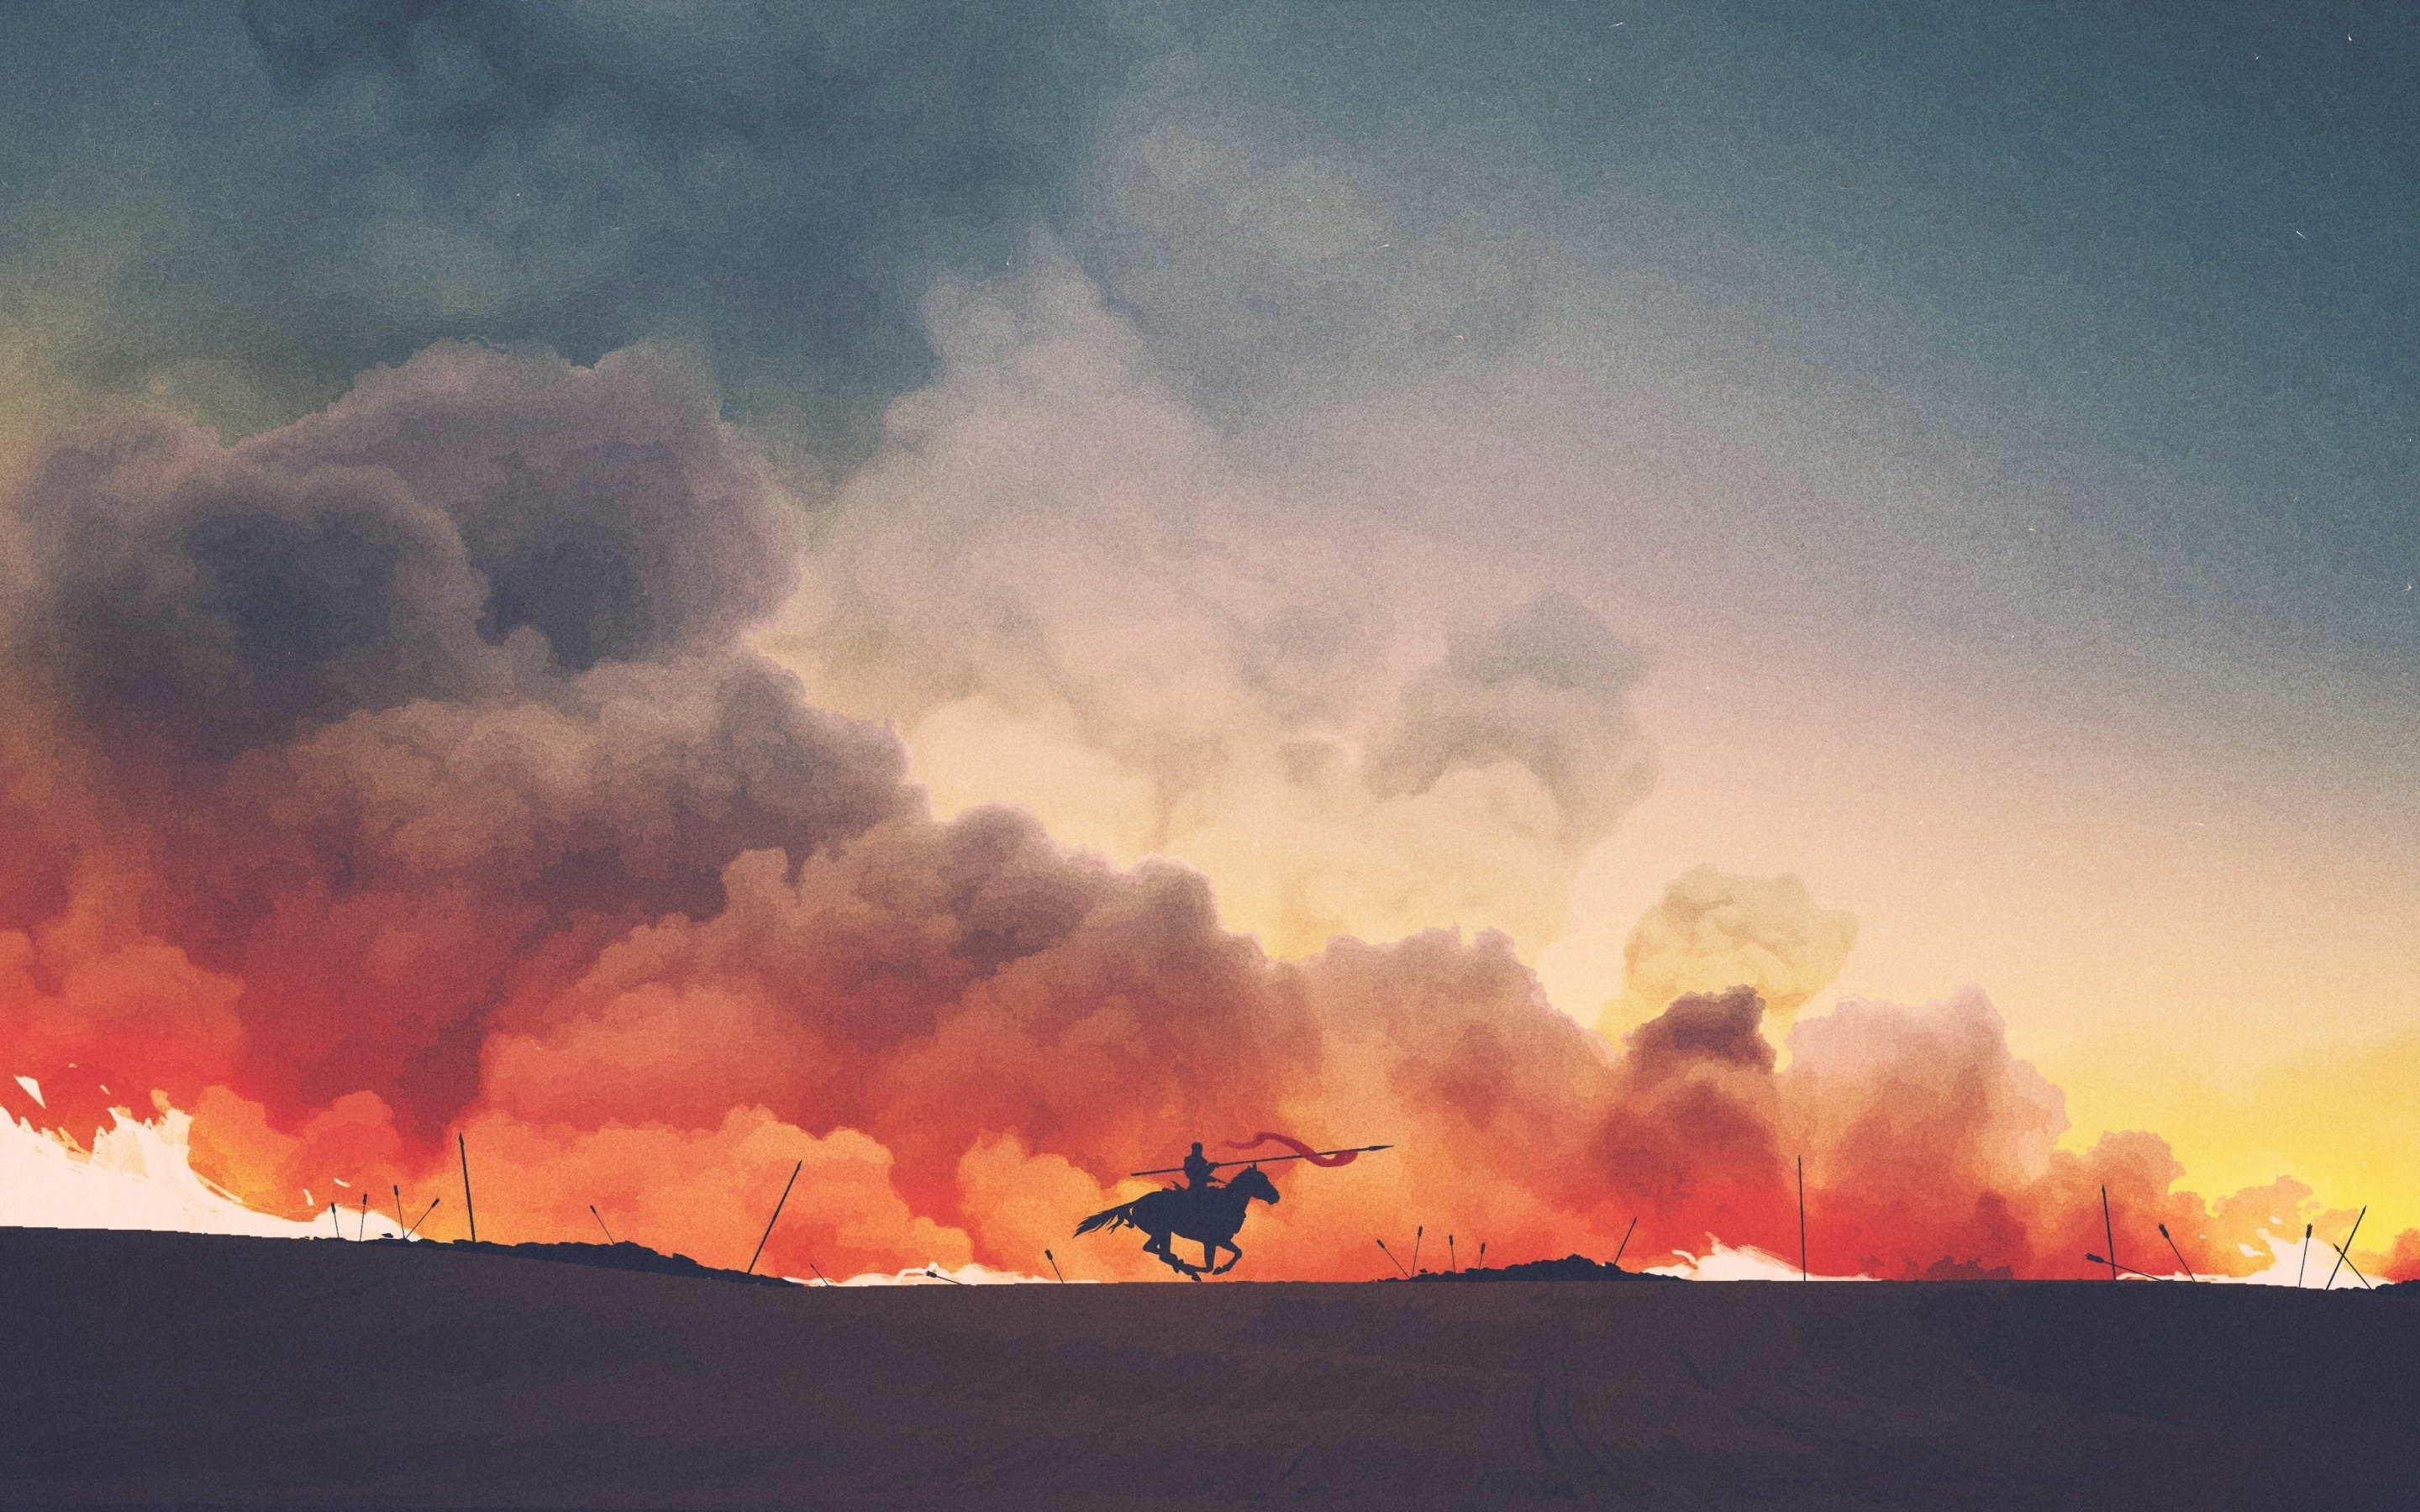 Game of thrones, tv show, art, fire and smoke, 2880x1800 wallpaper